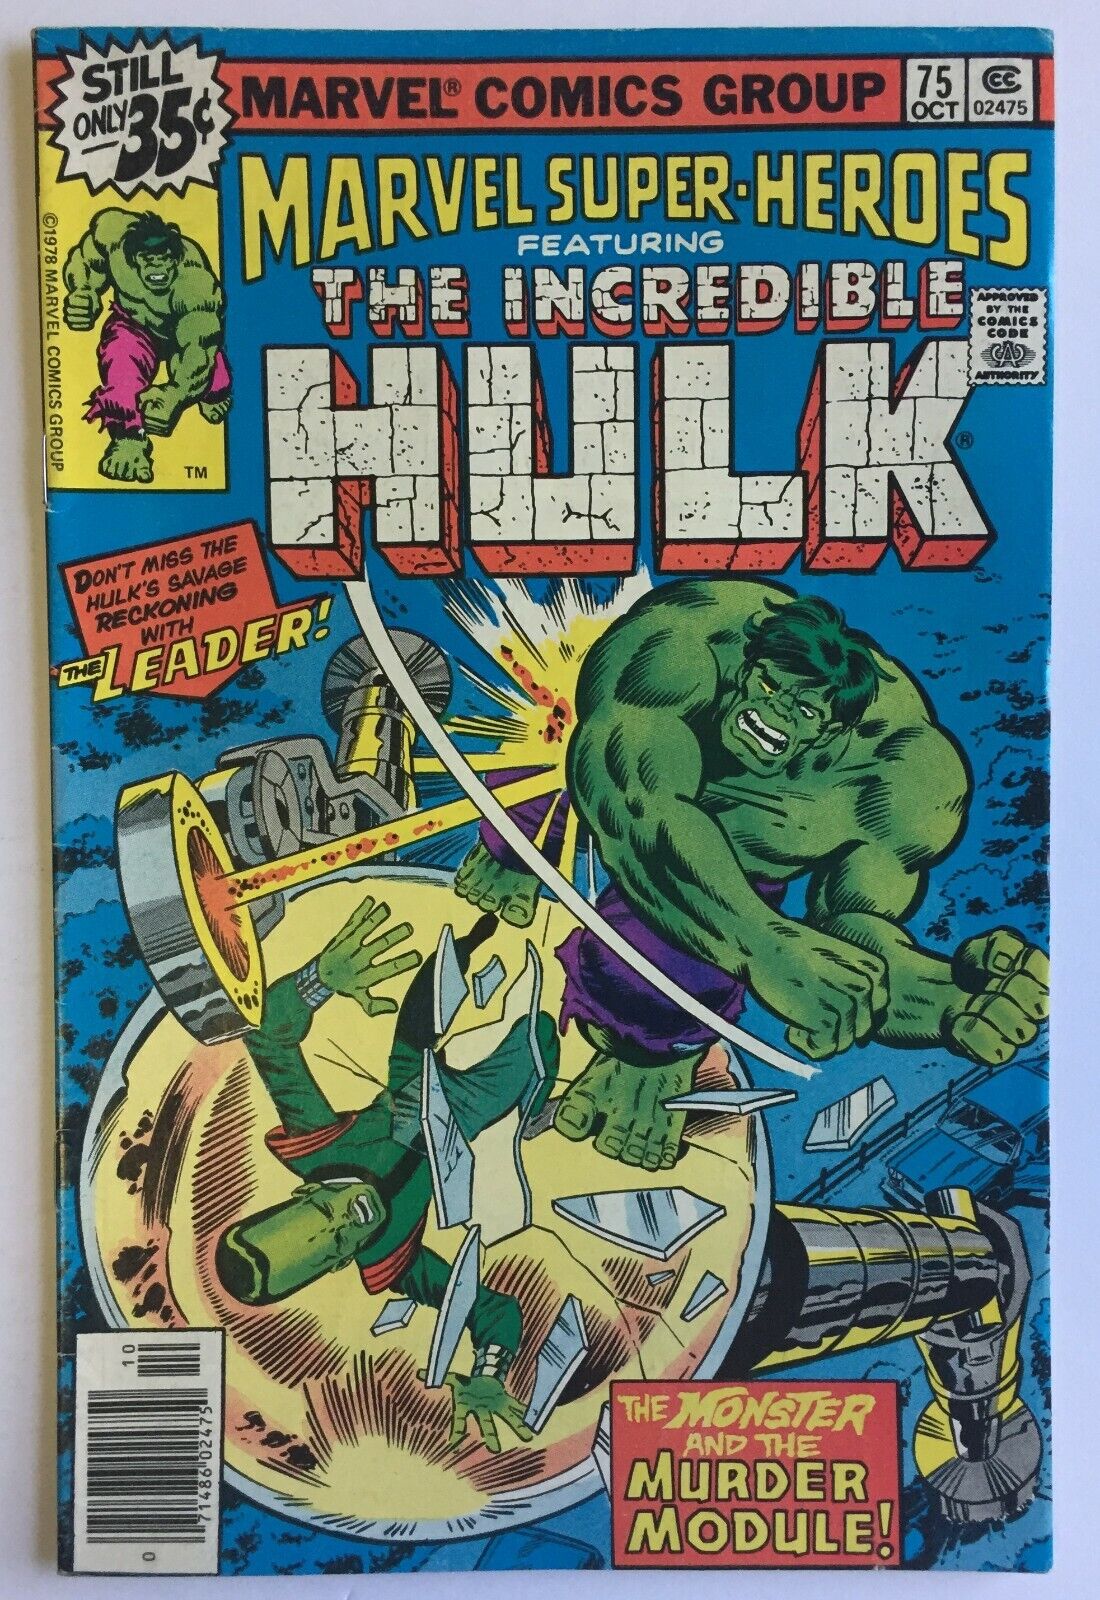 Marvel Super Heroes featuring The Incredible Hulk #75 (Oct 1978, Marvel)